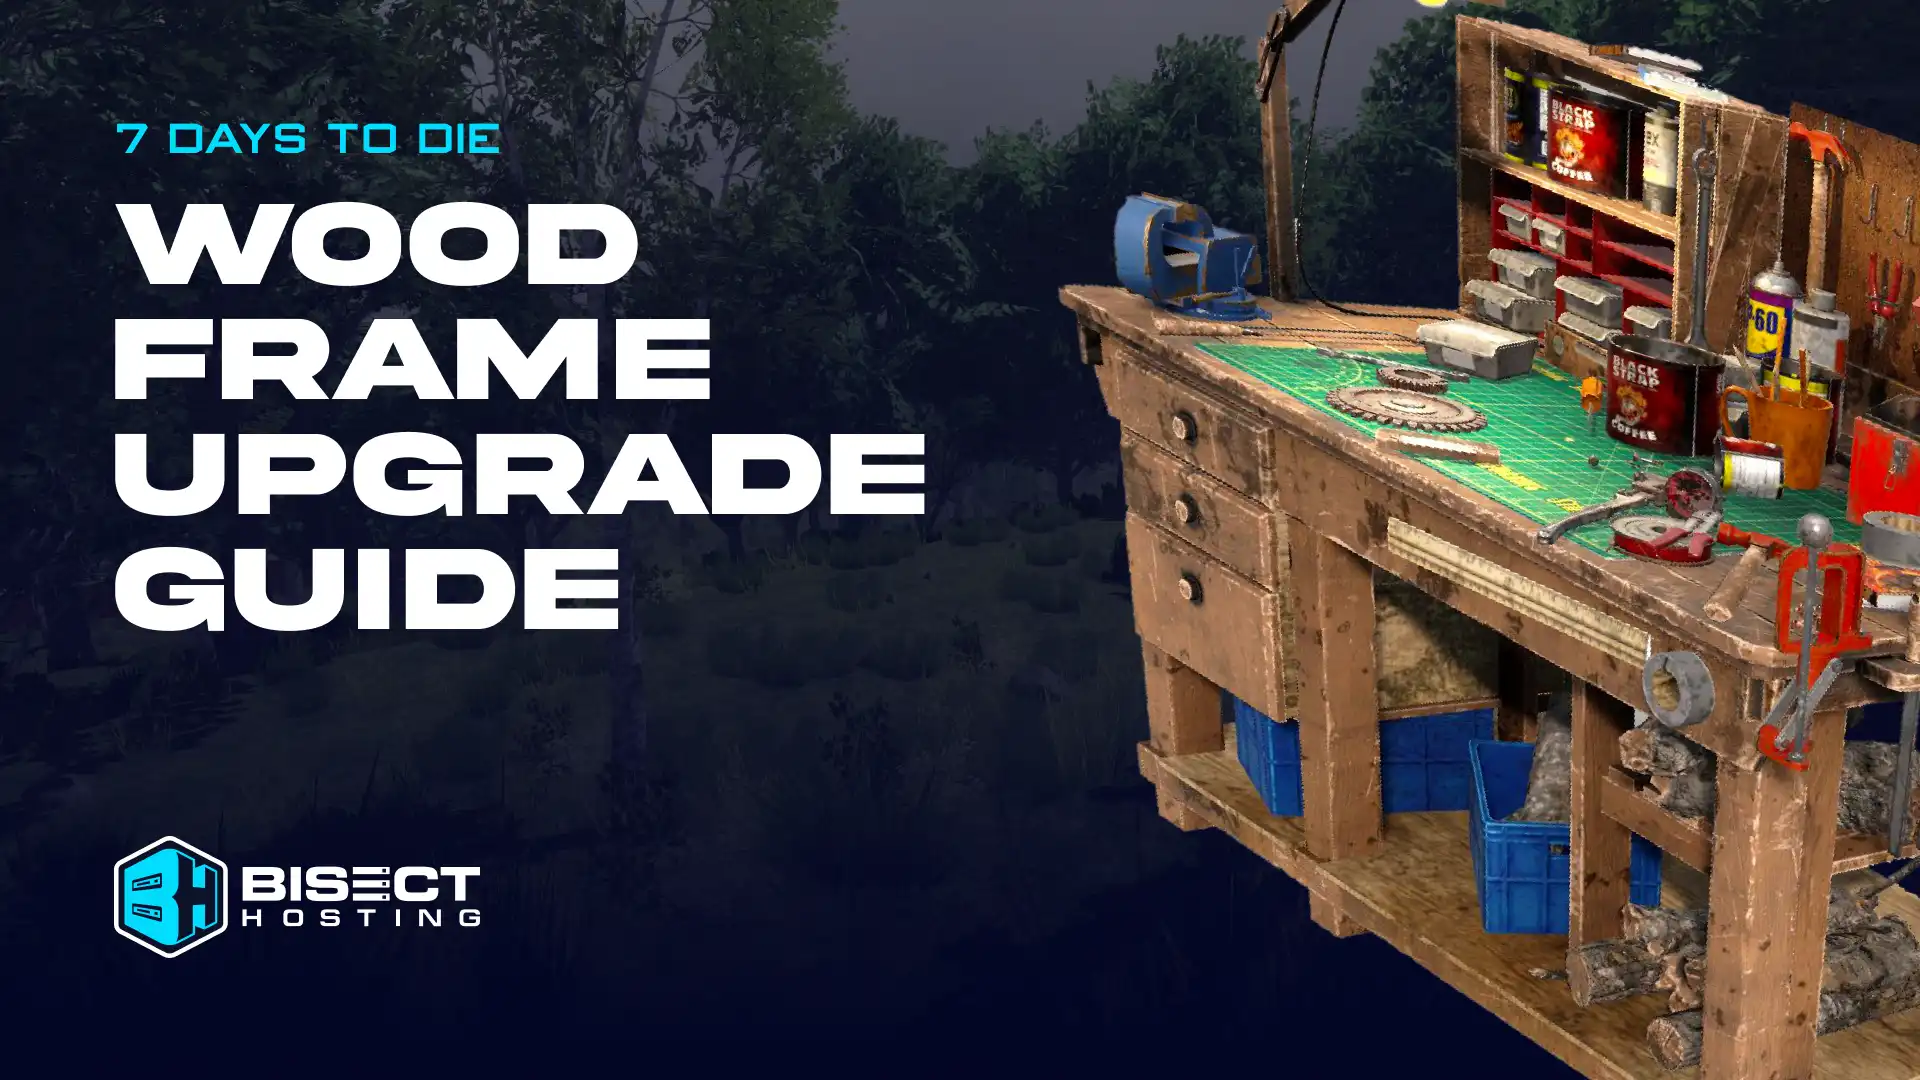 How to Upgrade Wood Frames in 7 Days to Die